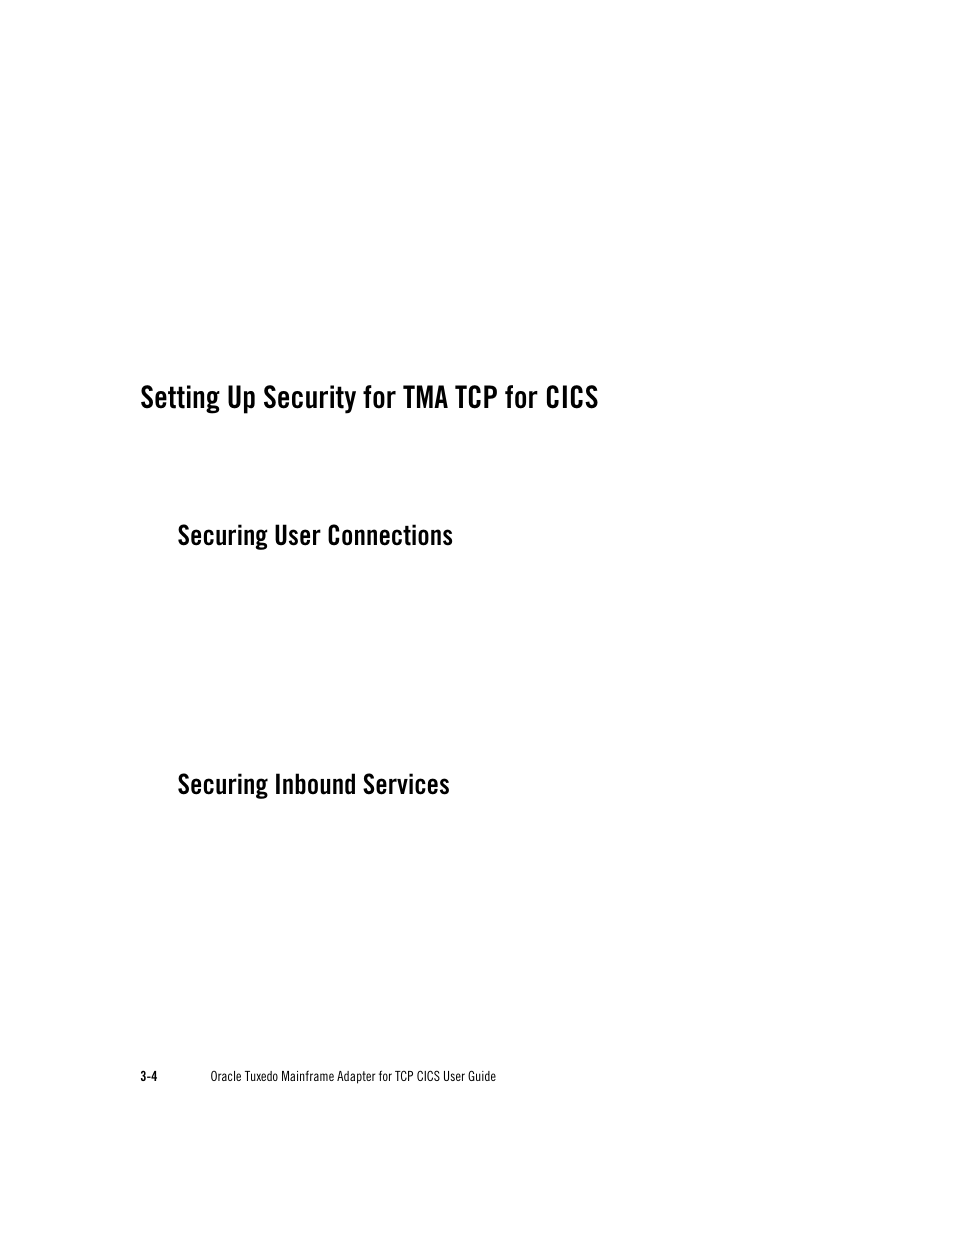 Setting up security for tma tcp for cics, Securing user connections, Securing inbound services | Oracle Audio Technologies Oracle Tuxedo User Manual | Page 32 / 112